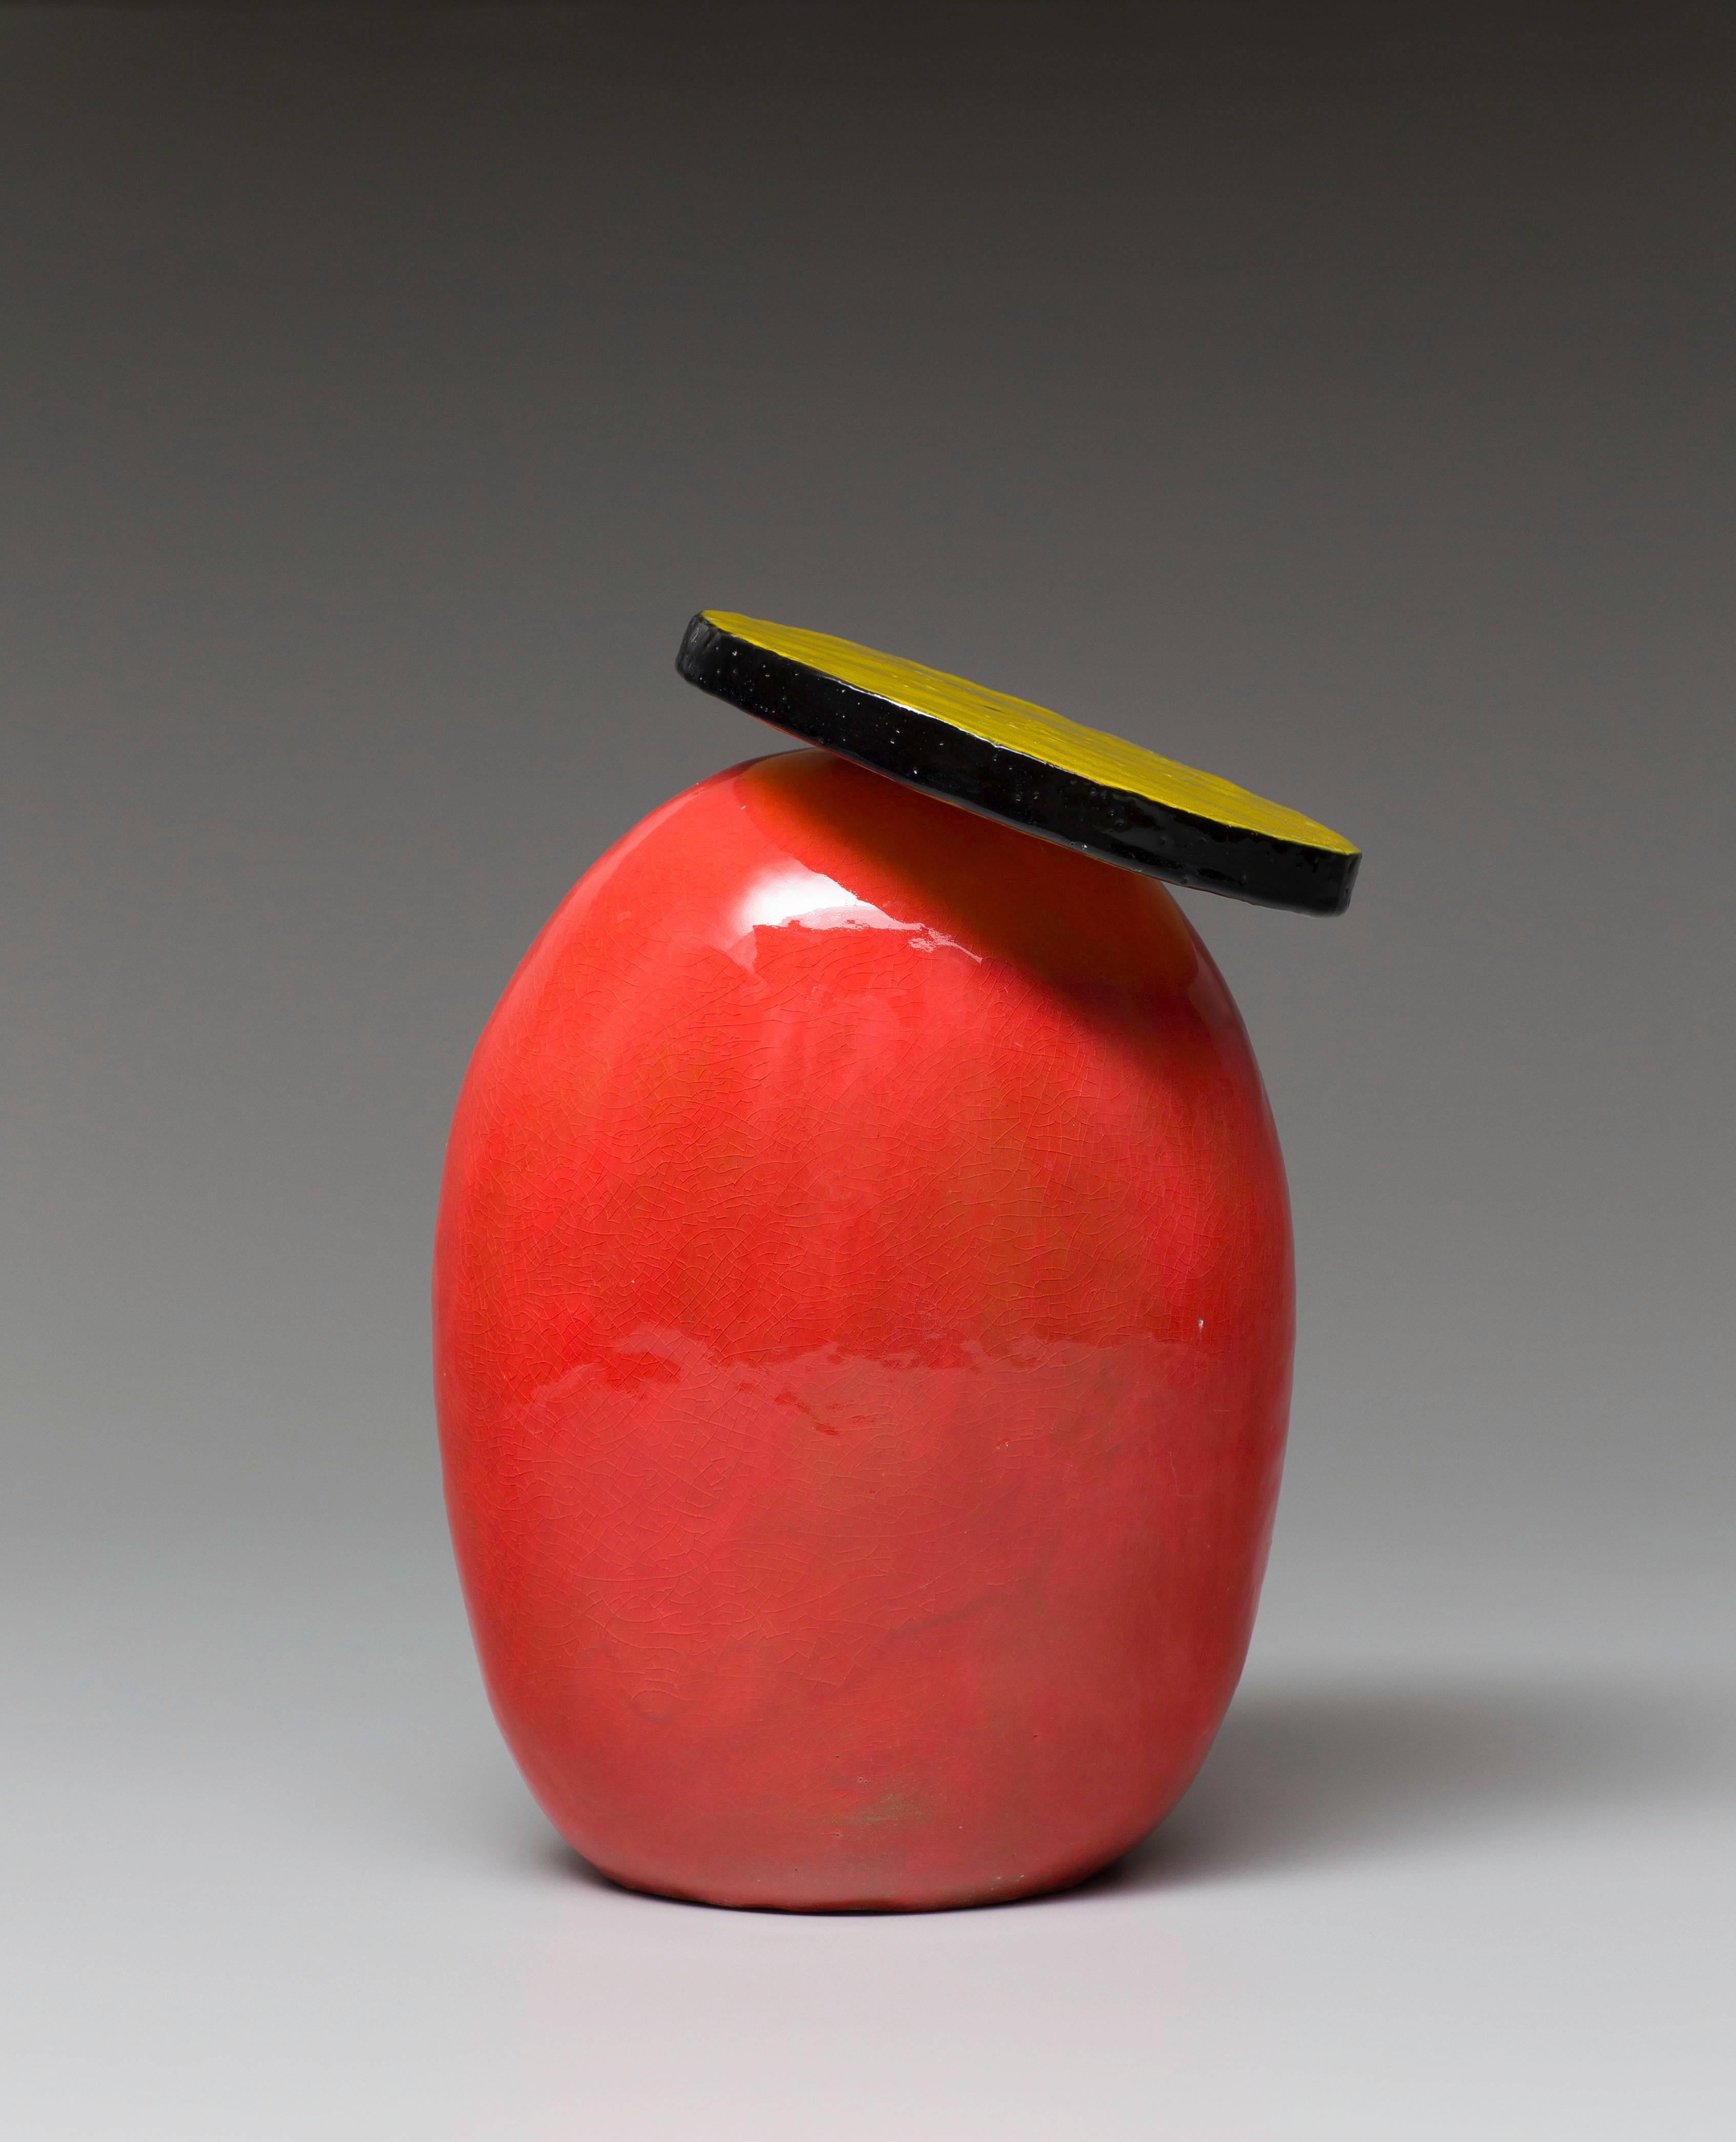 Jun Kaneko's work stretches decades and comes in many shapes and sizes. This newest body of work has previously only been exhibited in Japan, and showcases his mastery of ceramics that goes back to the early 1960's. 

Created 2016
Excellent